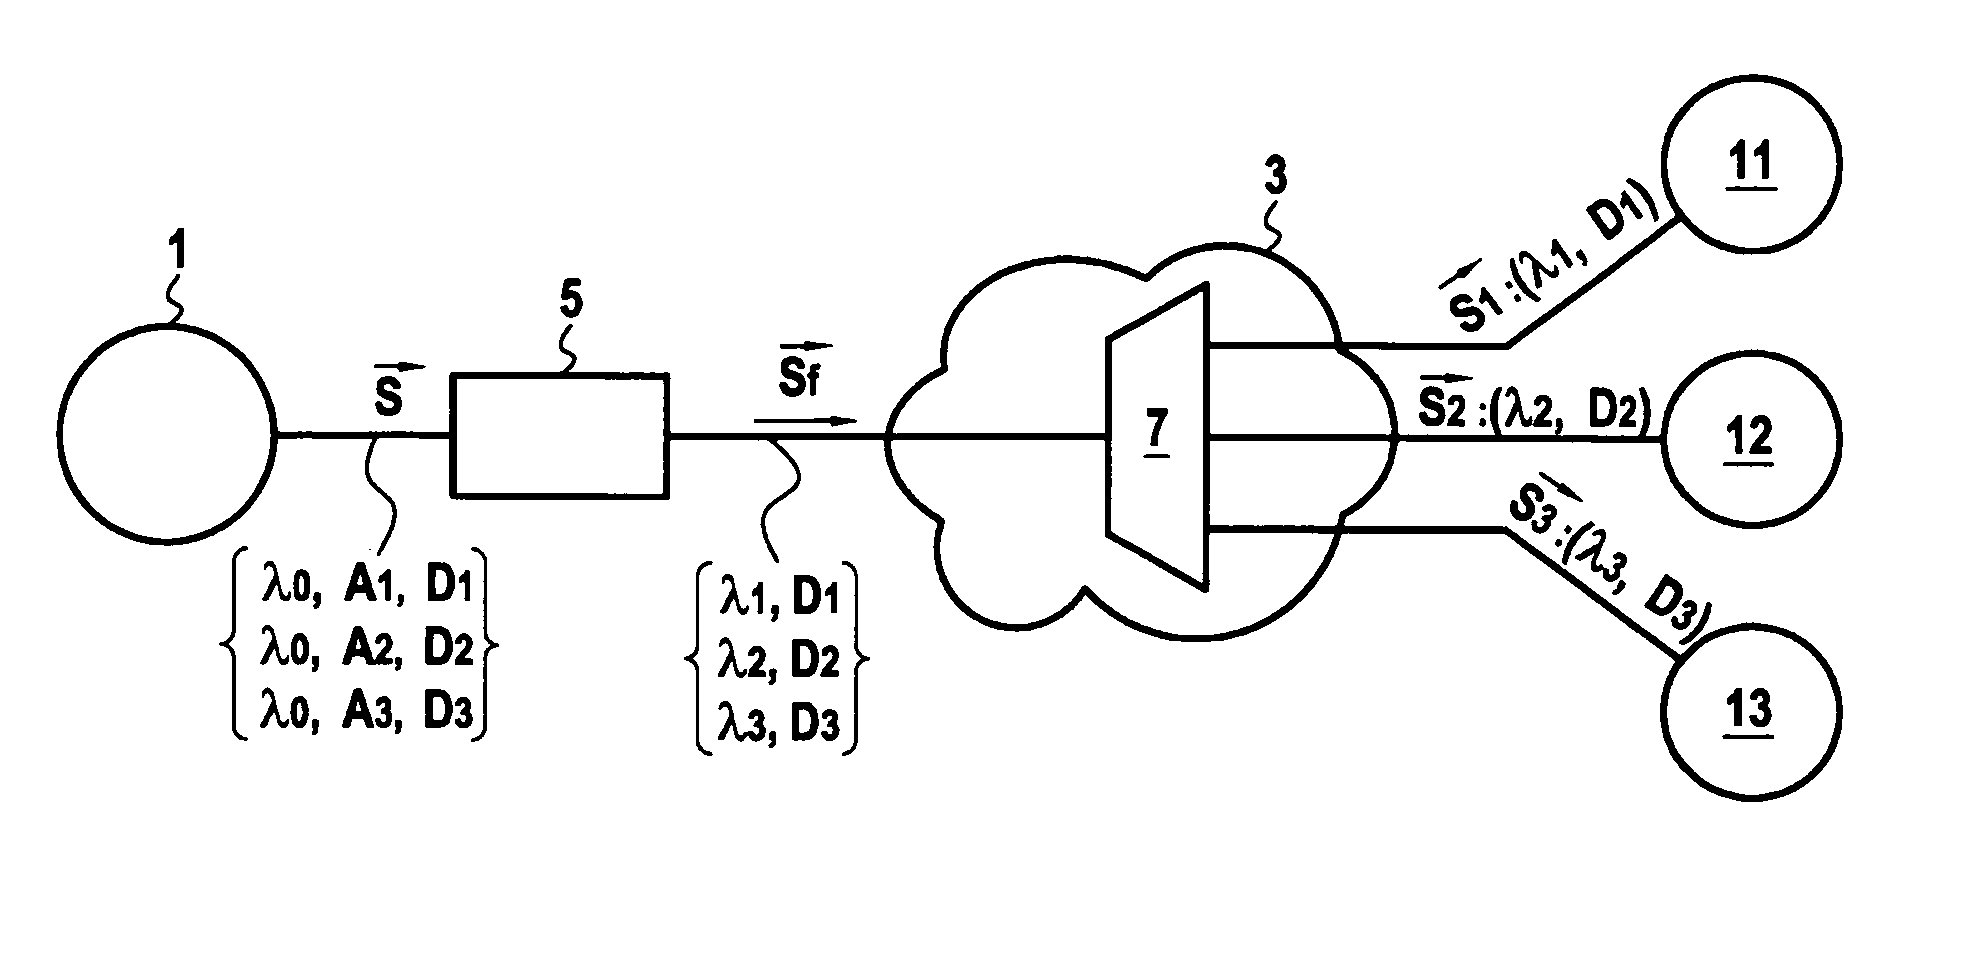 Optical Transmission Between a Central Terminal and a Plurality of Client Terminals via an Optical Network